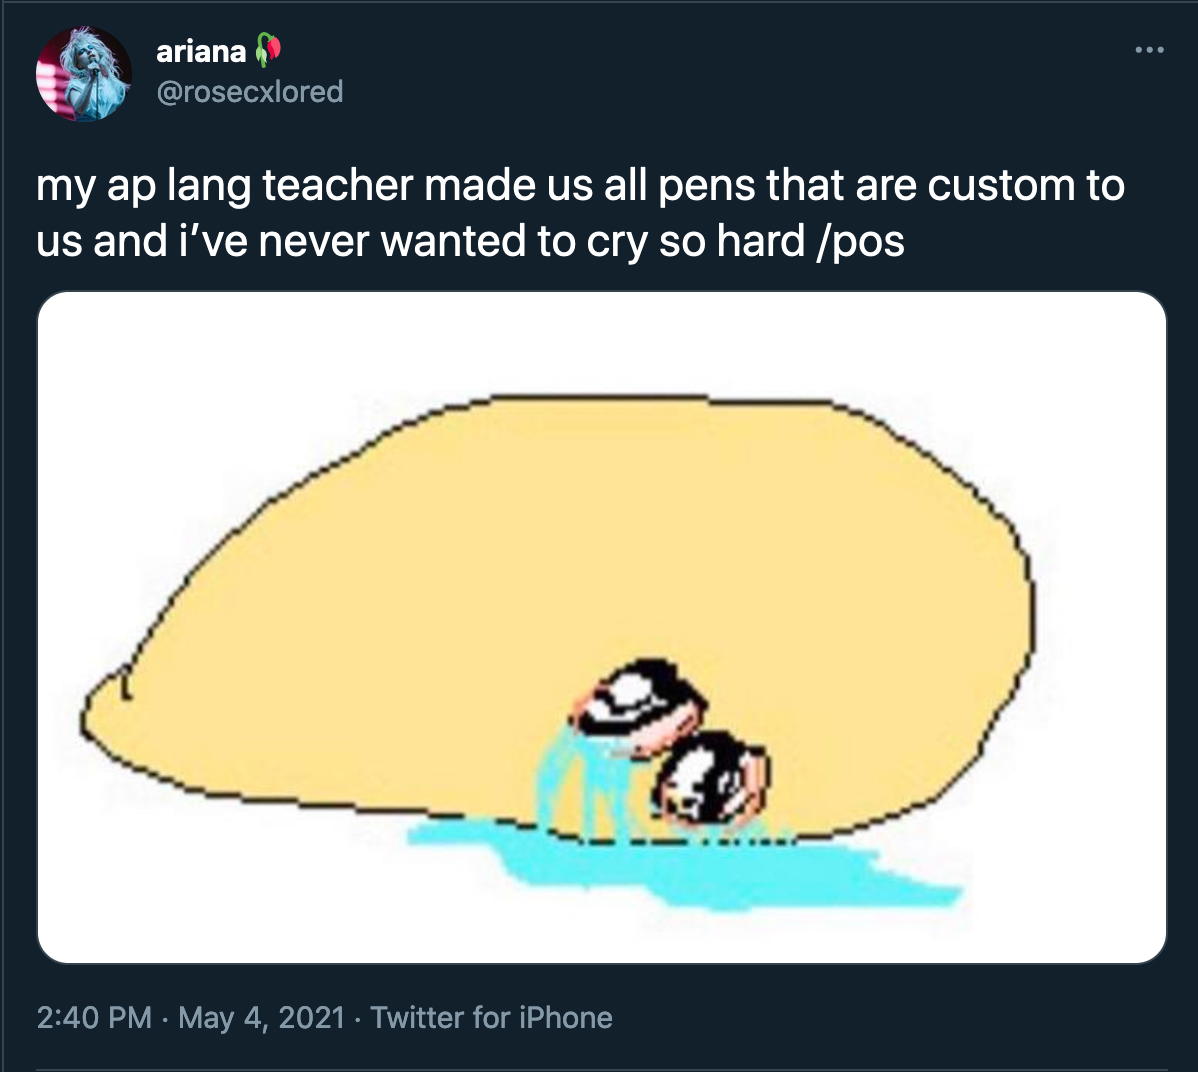 my ap lang teacher made us all pens that are custom to us and i've never wanted to cry so hard /pos, with an image of a crying potato